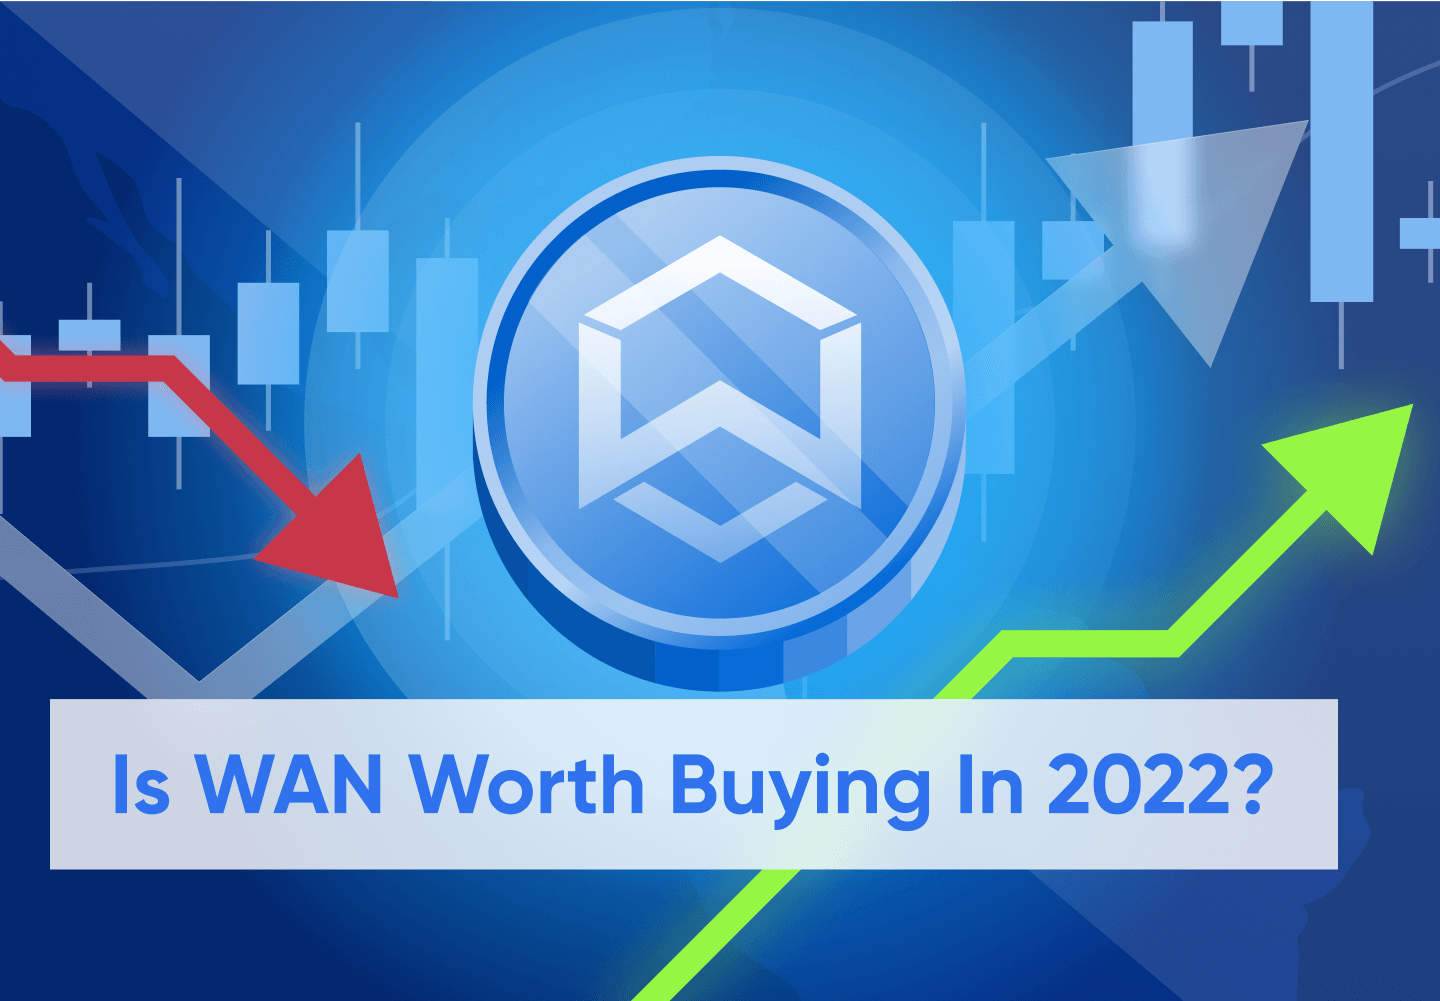 Wanchain (WAN) Price Prediction 2023: Long Term Price Prediction From 2023-2030